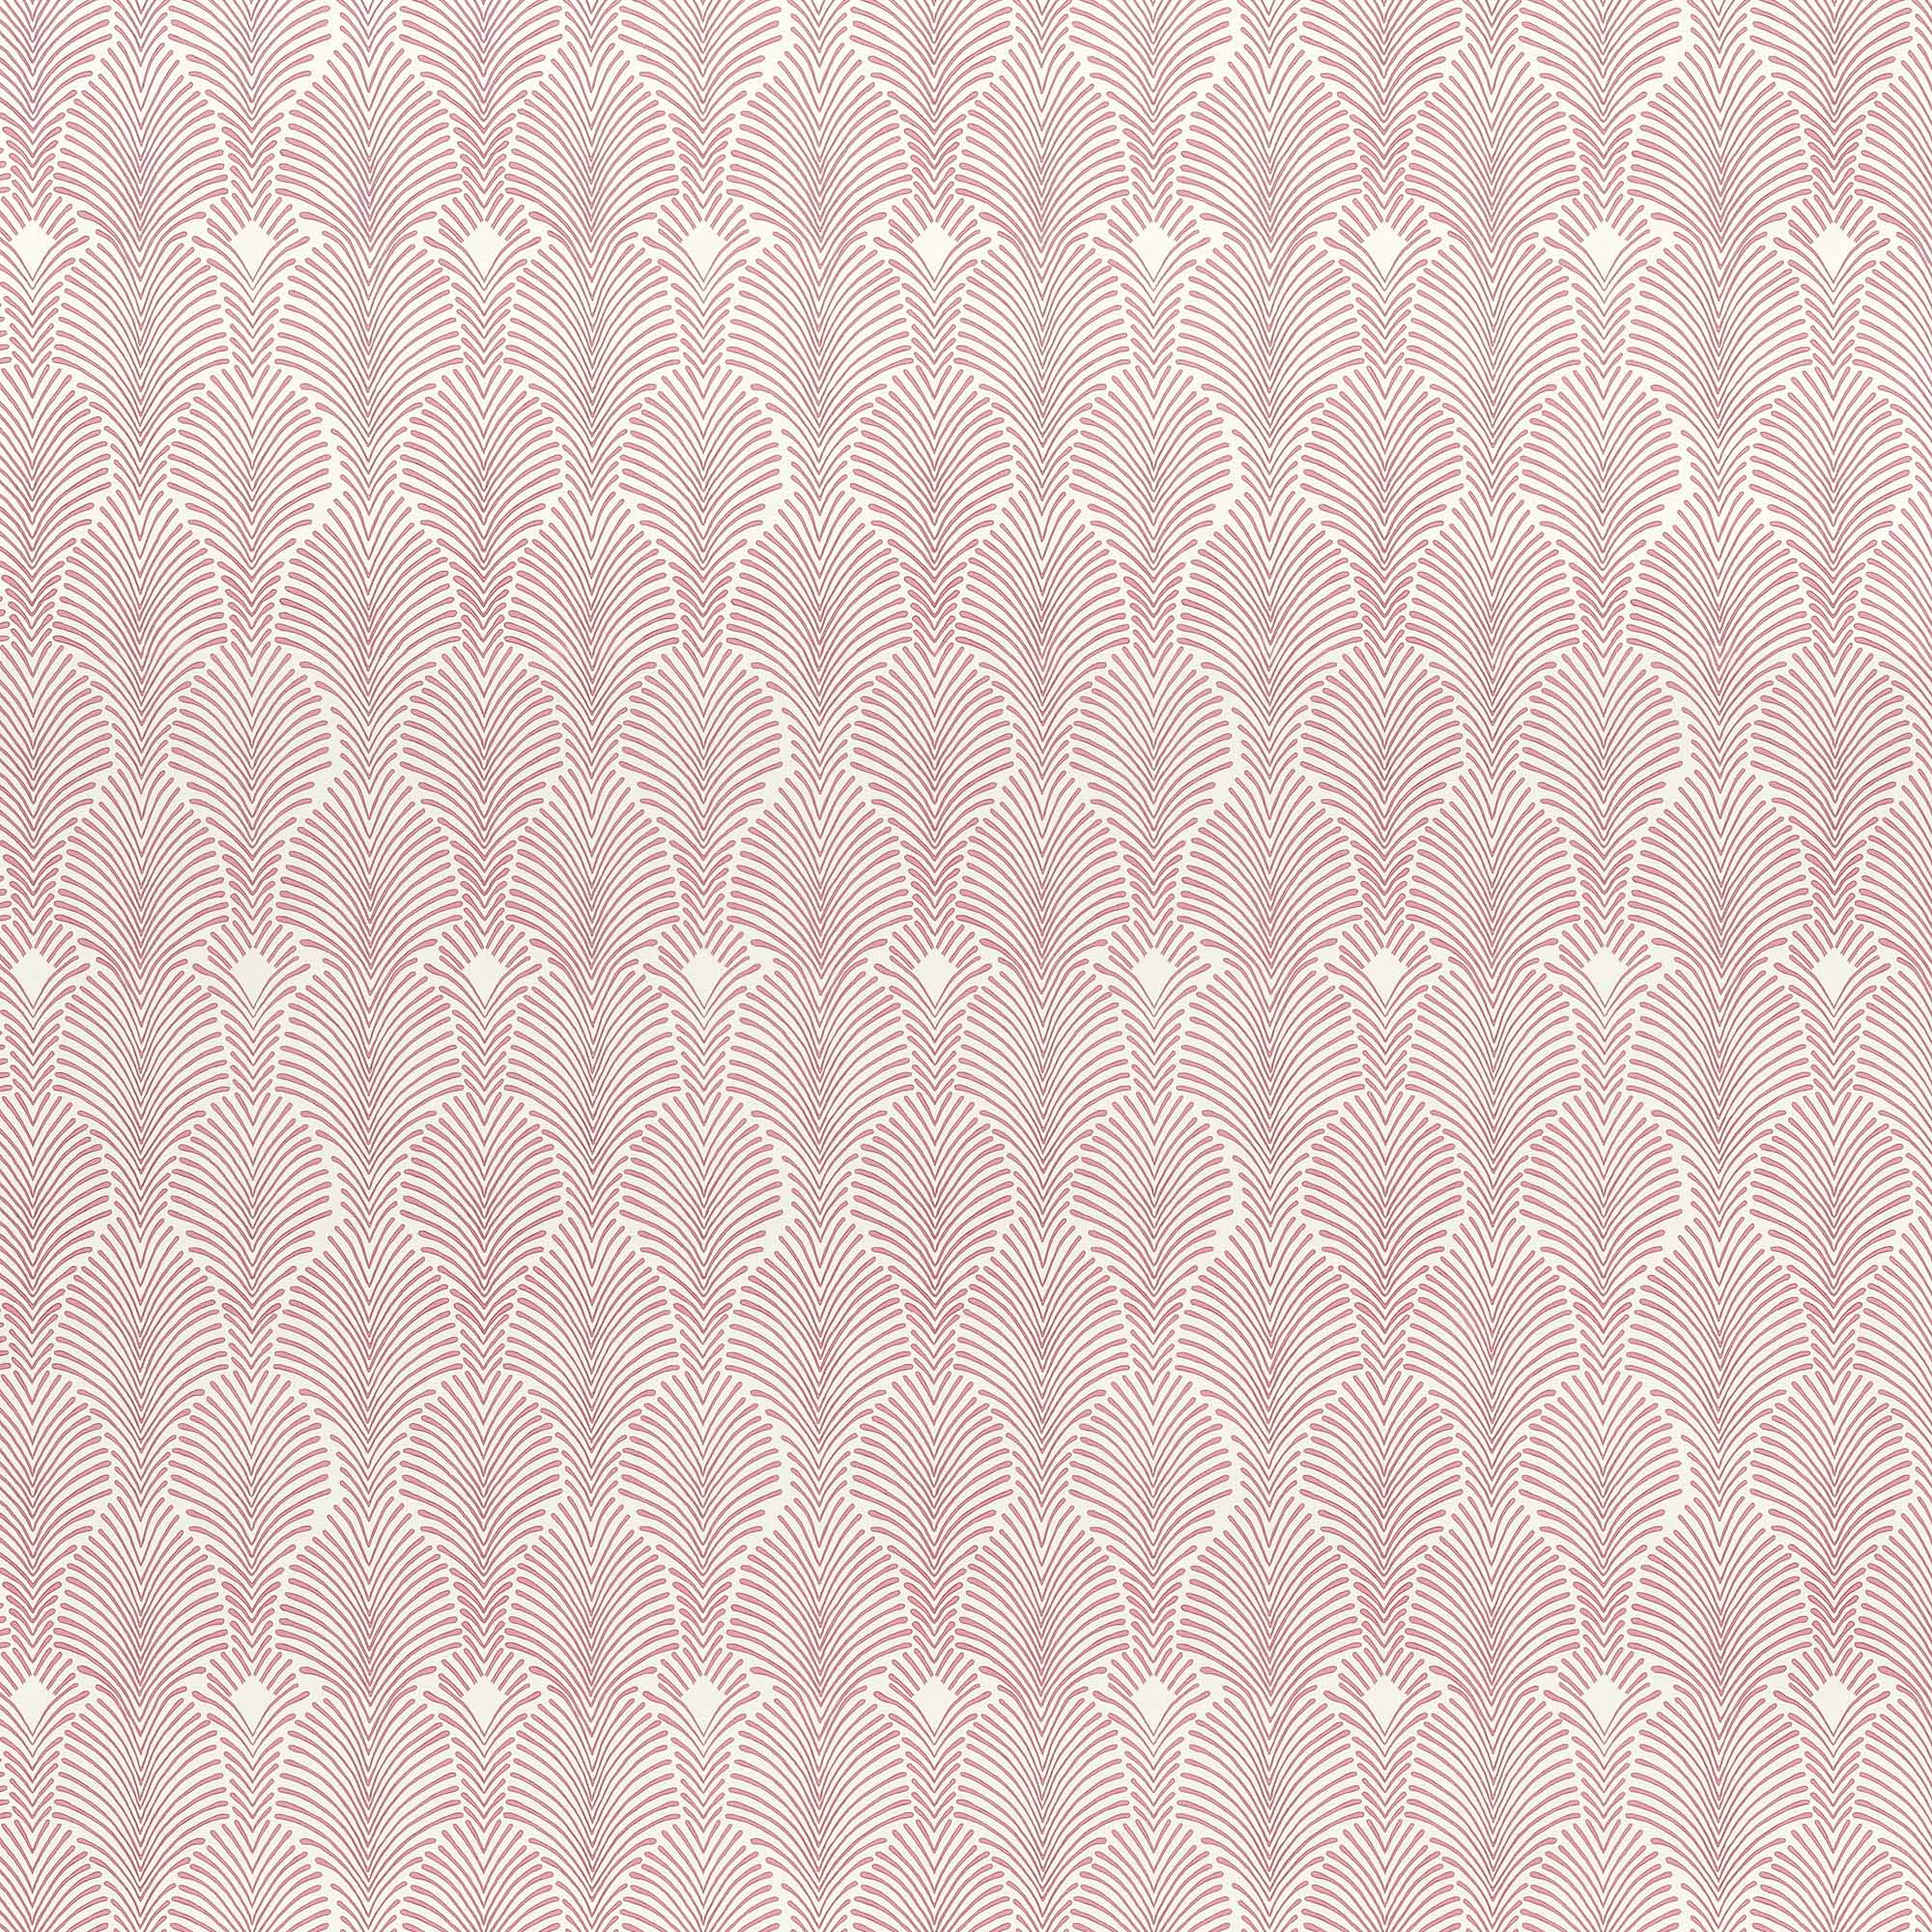 Detail of wallpaper in an art deco damask print in pink on a white field.